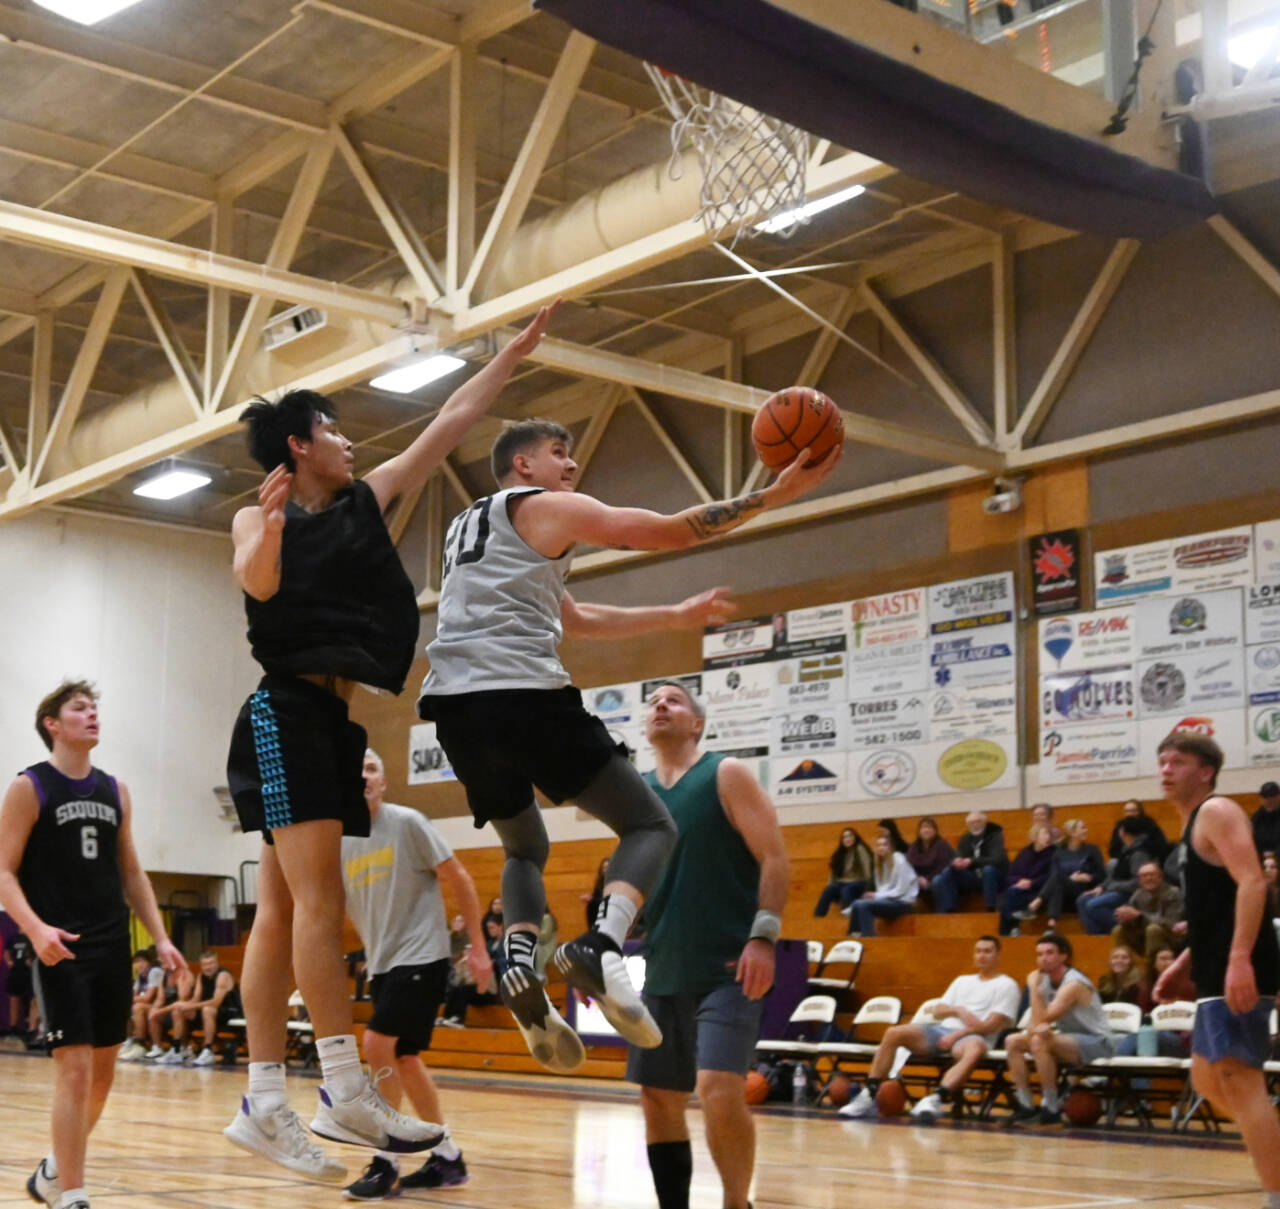 Sequim Gazette photo by Michael Dashiell / Sequim High alum John Textor drives to the basket for a score in the school’s annual alumni game on Nov. 24.